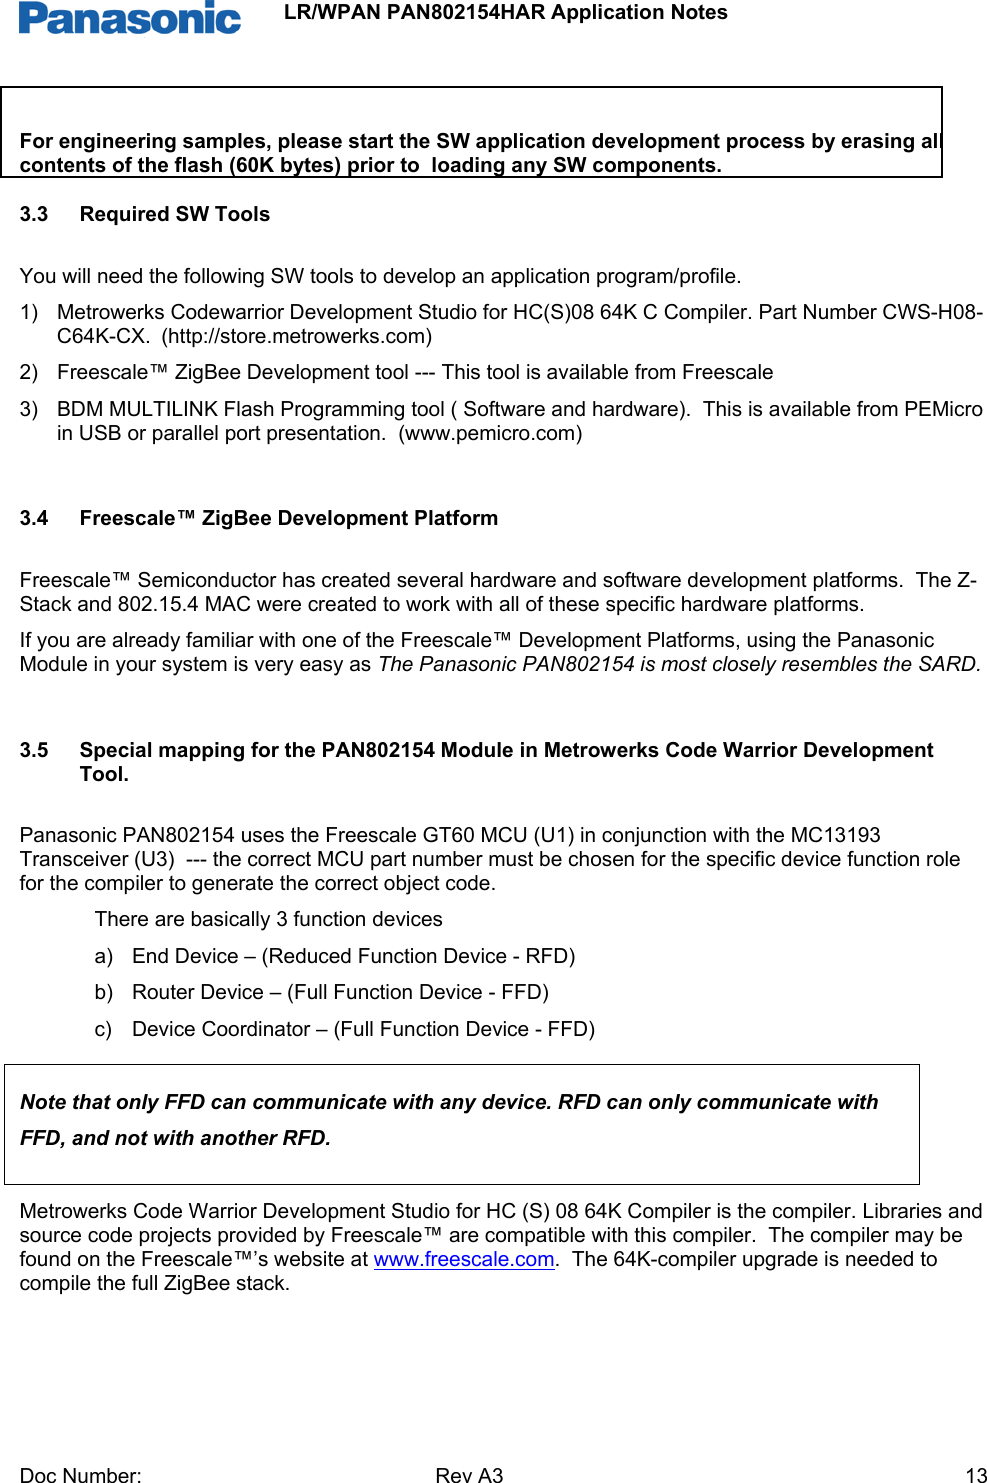                 LR/WPAN PAN802154HAR Application Notes Doc Number:   Rev A3    13 For engineering samples, please start the SW application development process by erasing all contents of the flash (60K bytes) prior to  loading any SW components. 3.3  Required SW Tools You will need the following SW tools to develop an application program/profile. 1)  Metrowerks Codewarrior Development Studio for HC(S)08 64K C Compiler. Part Number CWS-H08-C64K-CX.  (http://store.metrowerks.com) 2)  Freescale™ ZigBee Development tool --- This tool is available from Freescale 3)  BDM MULTILINK Flash Programming tool ( Software and hardware).  This is available from PEMicro in USB or parallel port presentation.  (www.pemicro.com)  3.4  Freescale™ ZigBee Development Platform Freescale™ Semiconductor has created several hardware and software development platforms.  The Z-Stack and 802.15.4 MAC were created to work with all of these specific hardware platforms. If you are already familiar with one of the Freescale™ Development Platforms, using the Panasonic Module in your system is very easy as The Panasonic PAN802154 is most closely resembles the SARD.  3.5  Special mapping for the PAN802154 Module in Metrowerks Code Warrior Development Tool. Panasonic PAN802154 uses the Freescale GT60 MCU (U1) in conjunction with the MC13193 Transceiver (U3)  --- the correct MCU part number must be chosen for the specific device function role for the compiler to generate the correct object code.   There are basically 3 function devices a)  End Device – (Reduced Function Device - RFD) b)  Router Device – (Full Function Device - FFD) c)  Device Coordinator – (Full Function Device - FFD)  Note that only FFD can communicate with any device. RFD can only communicate with  FFD, and not with another RFD.  Metrowerks Code Warrior Development Studio for HC (S) 08 64K Compiler is the compiler. Libraries and source code projects provided by Freescale™ are compatible with this compiler.  The compiler may be found on the Freescale™’s website at www.freescale.com.  The 64K-compiler upgrade is needed to compile the full ZigBee stack.   